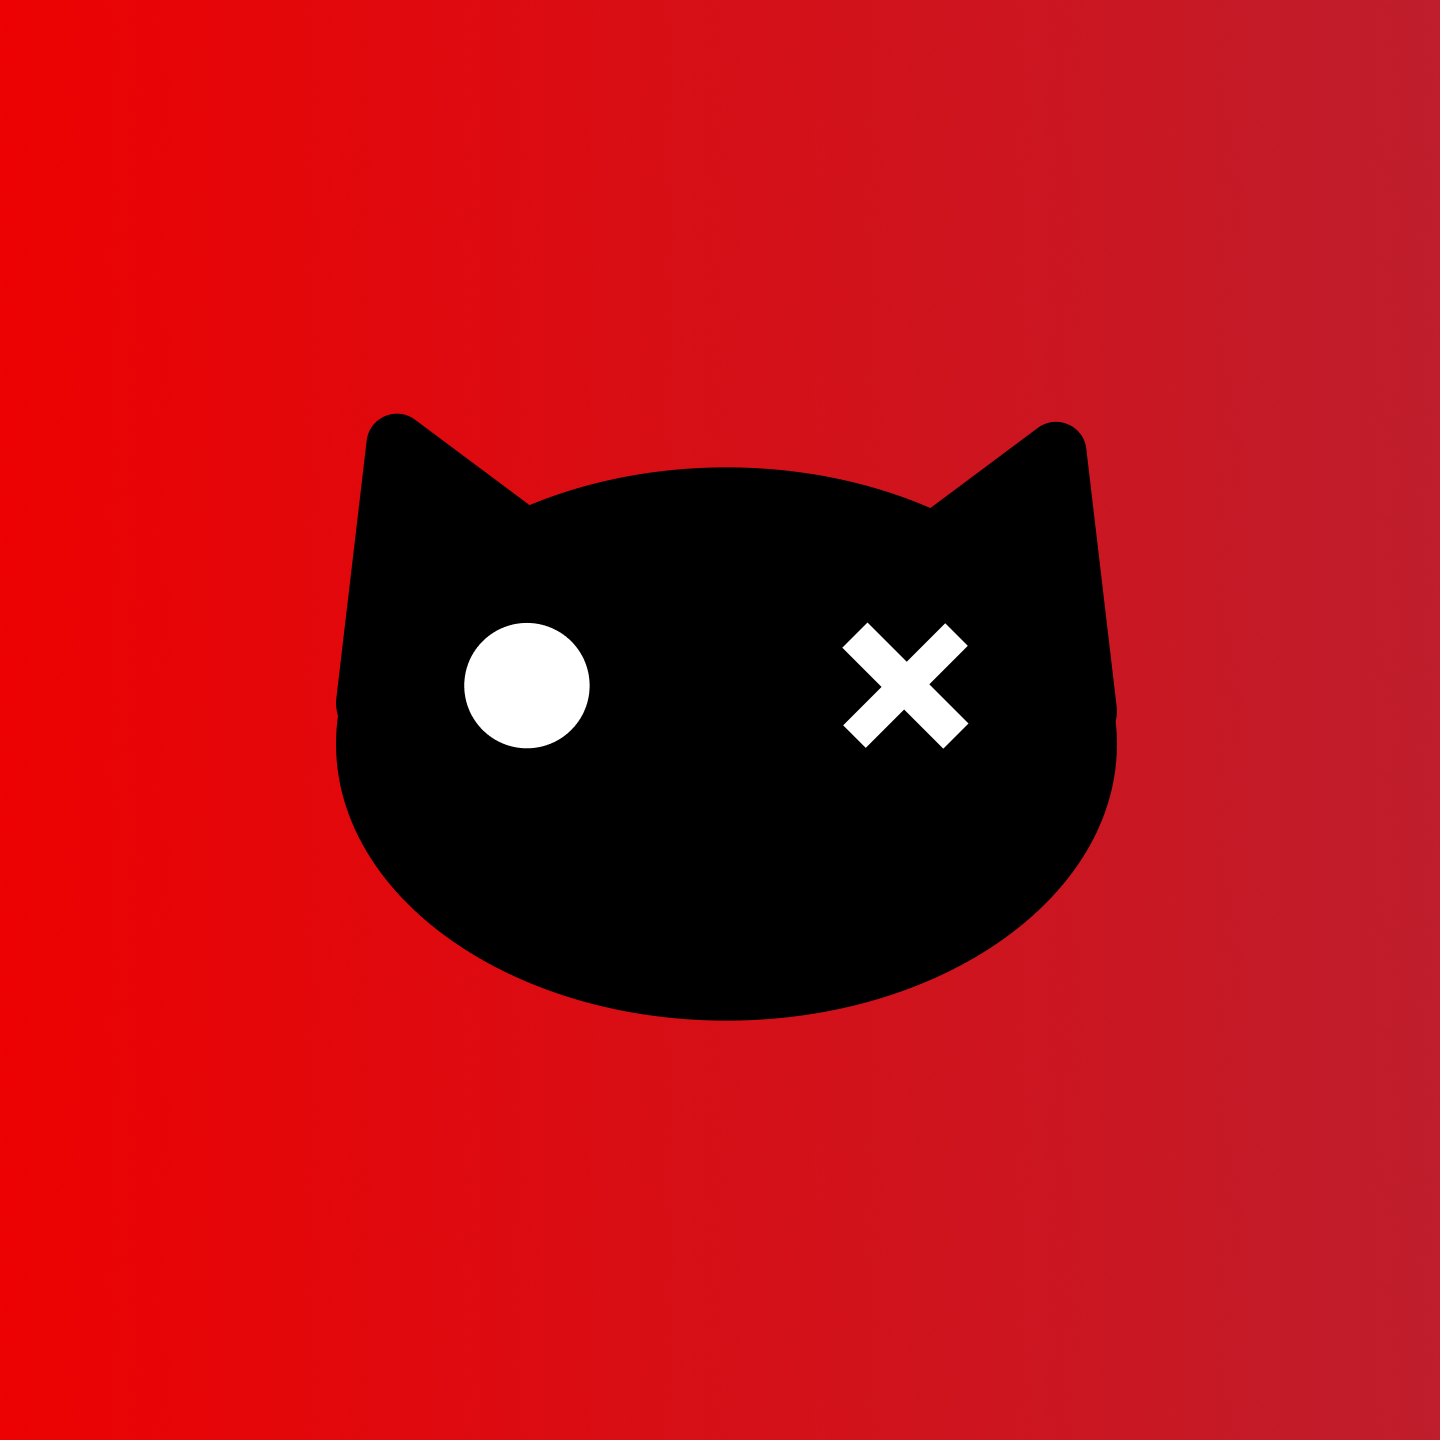 The Schrödinger cat in a red background